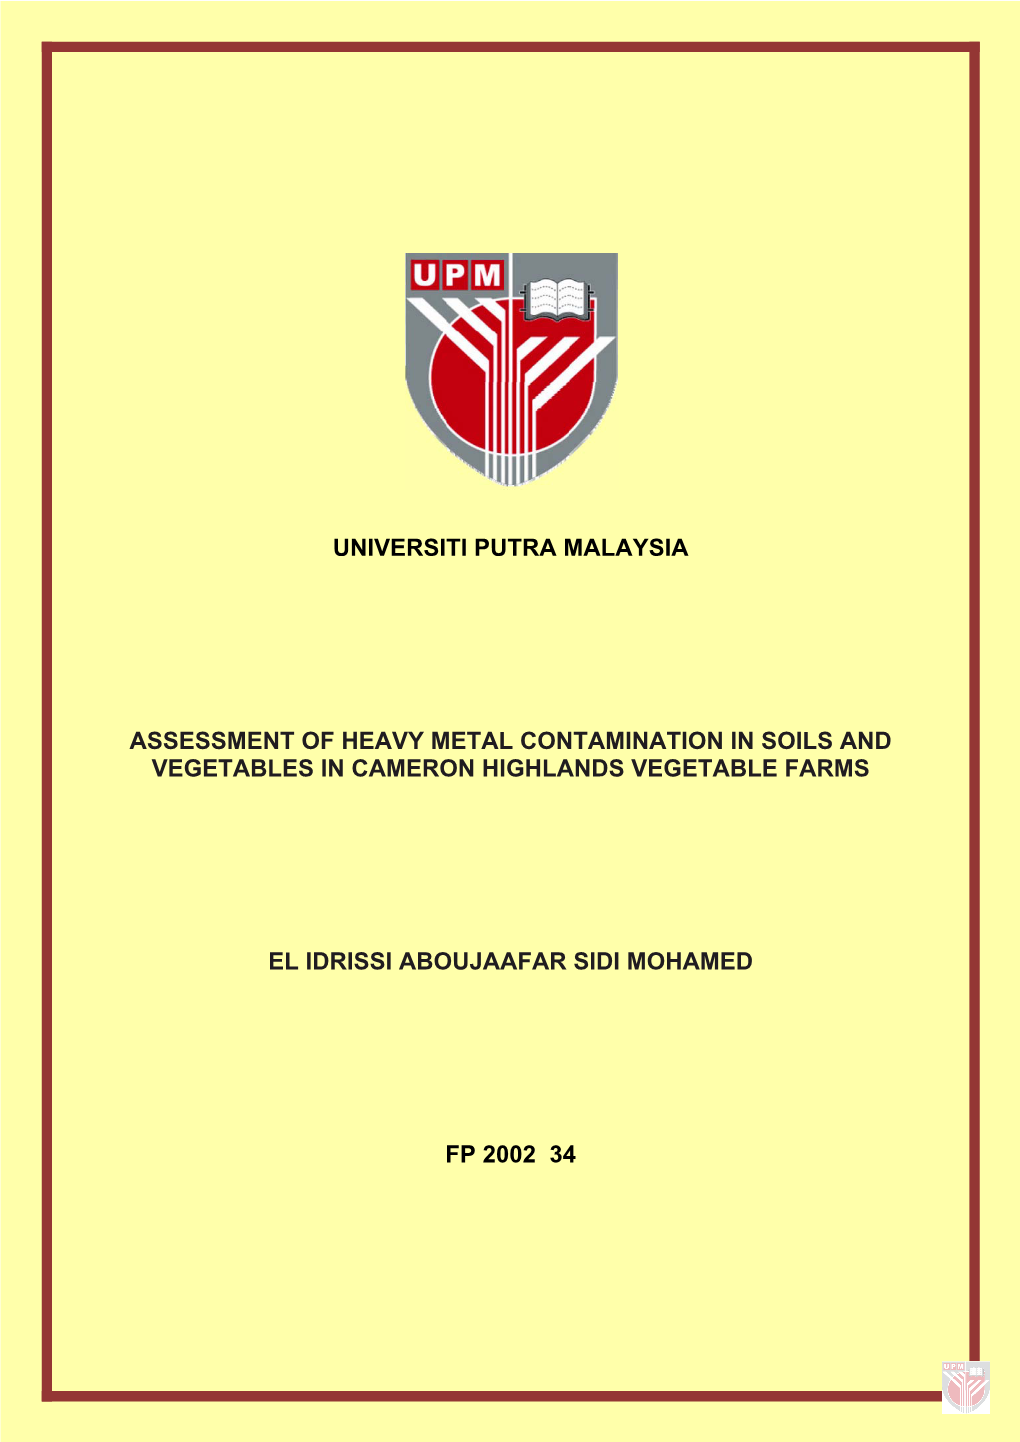 Assessment of Heavy Metal Contamination in Soils and Vegetables in Cameron Highlands Vegetable Farms